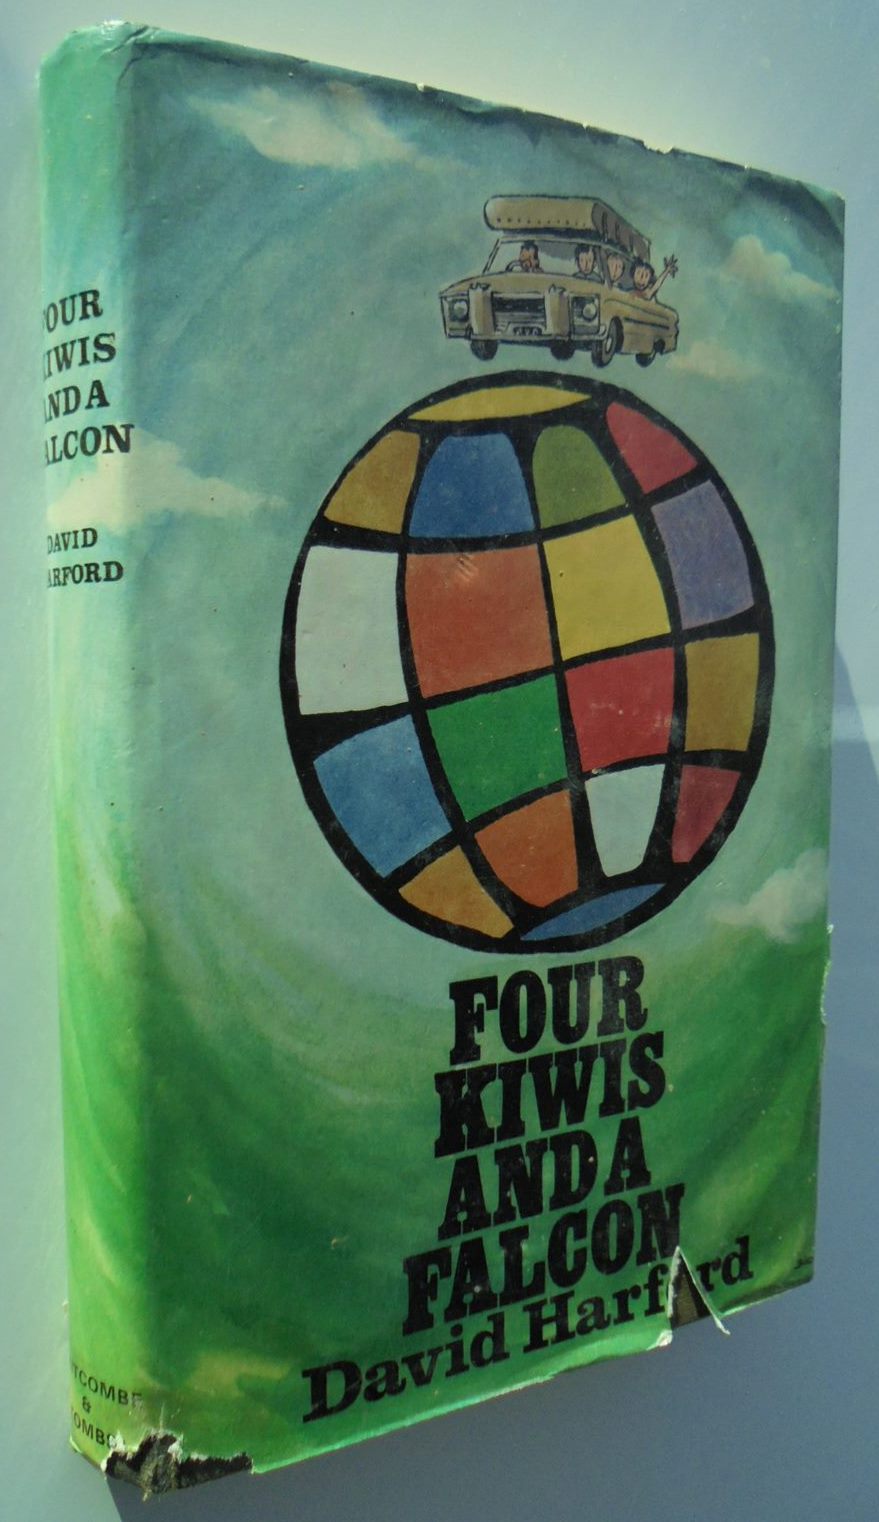 4 Kiwis and a Falcon. By DAVID HARFORD (1970) 1st edition